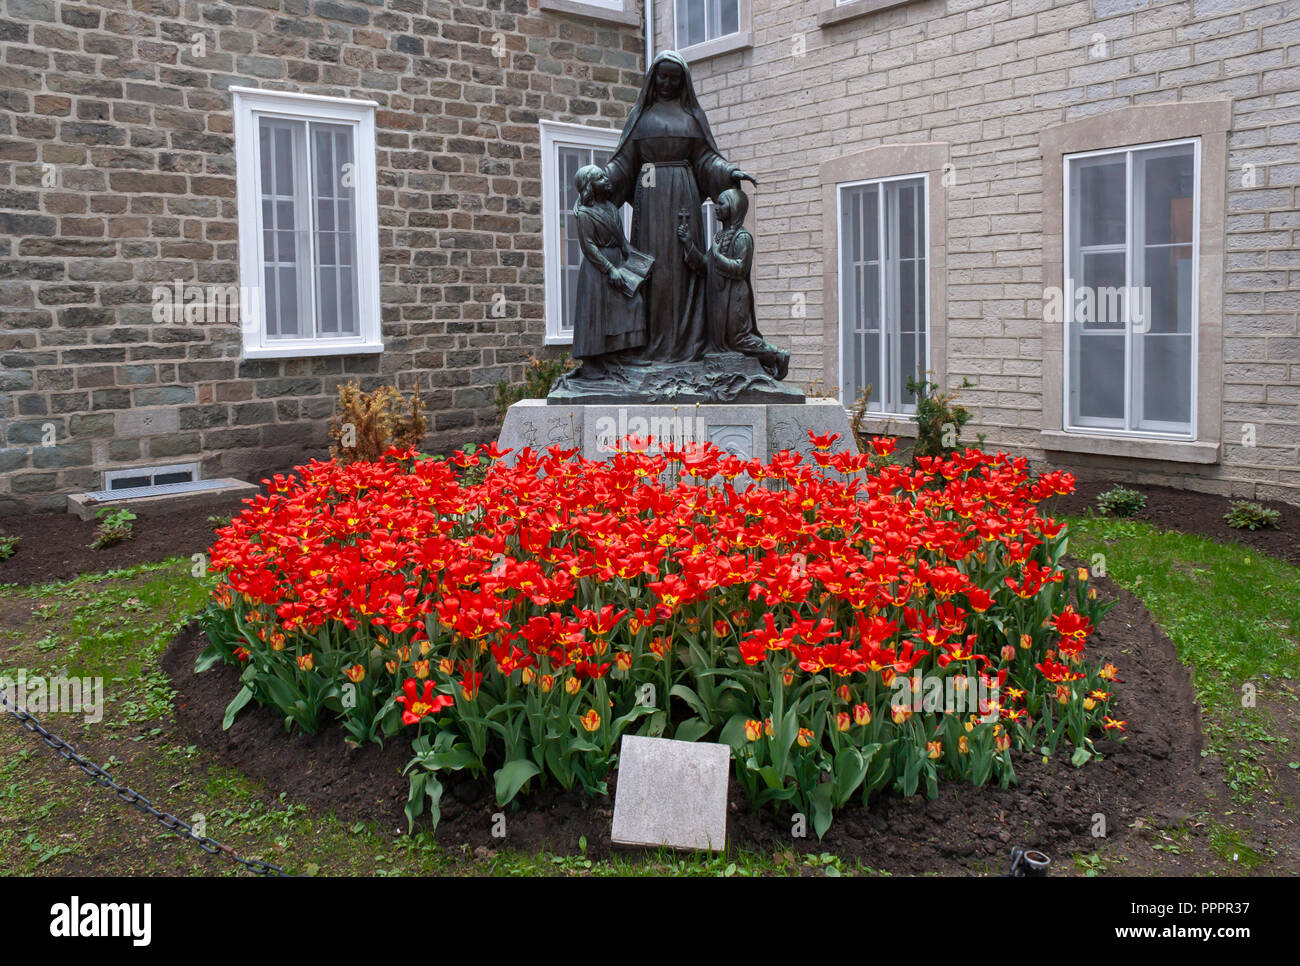 The statue of the Saint Marie of the Incarnation, the foundress of the Ursuline Order in Canada, in front of the Ursulines School in Quebec City. Stock Photo